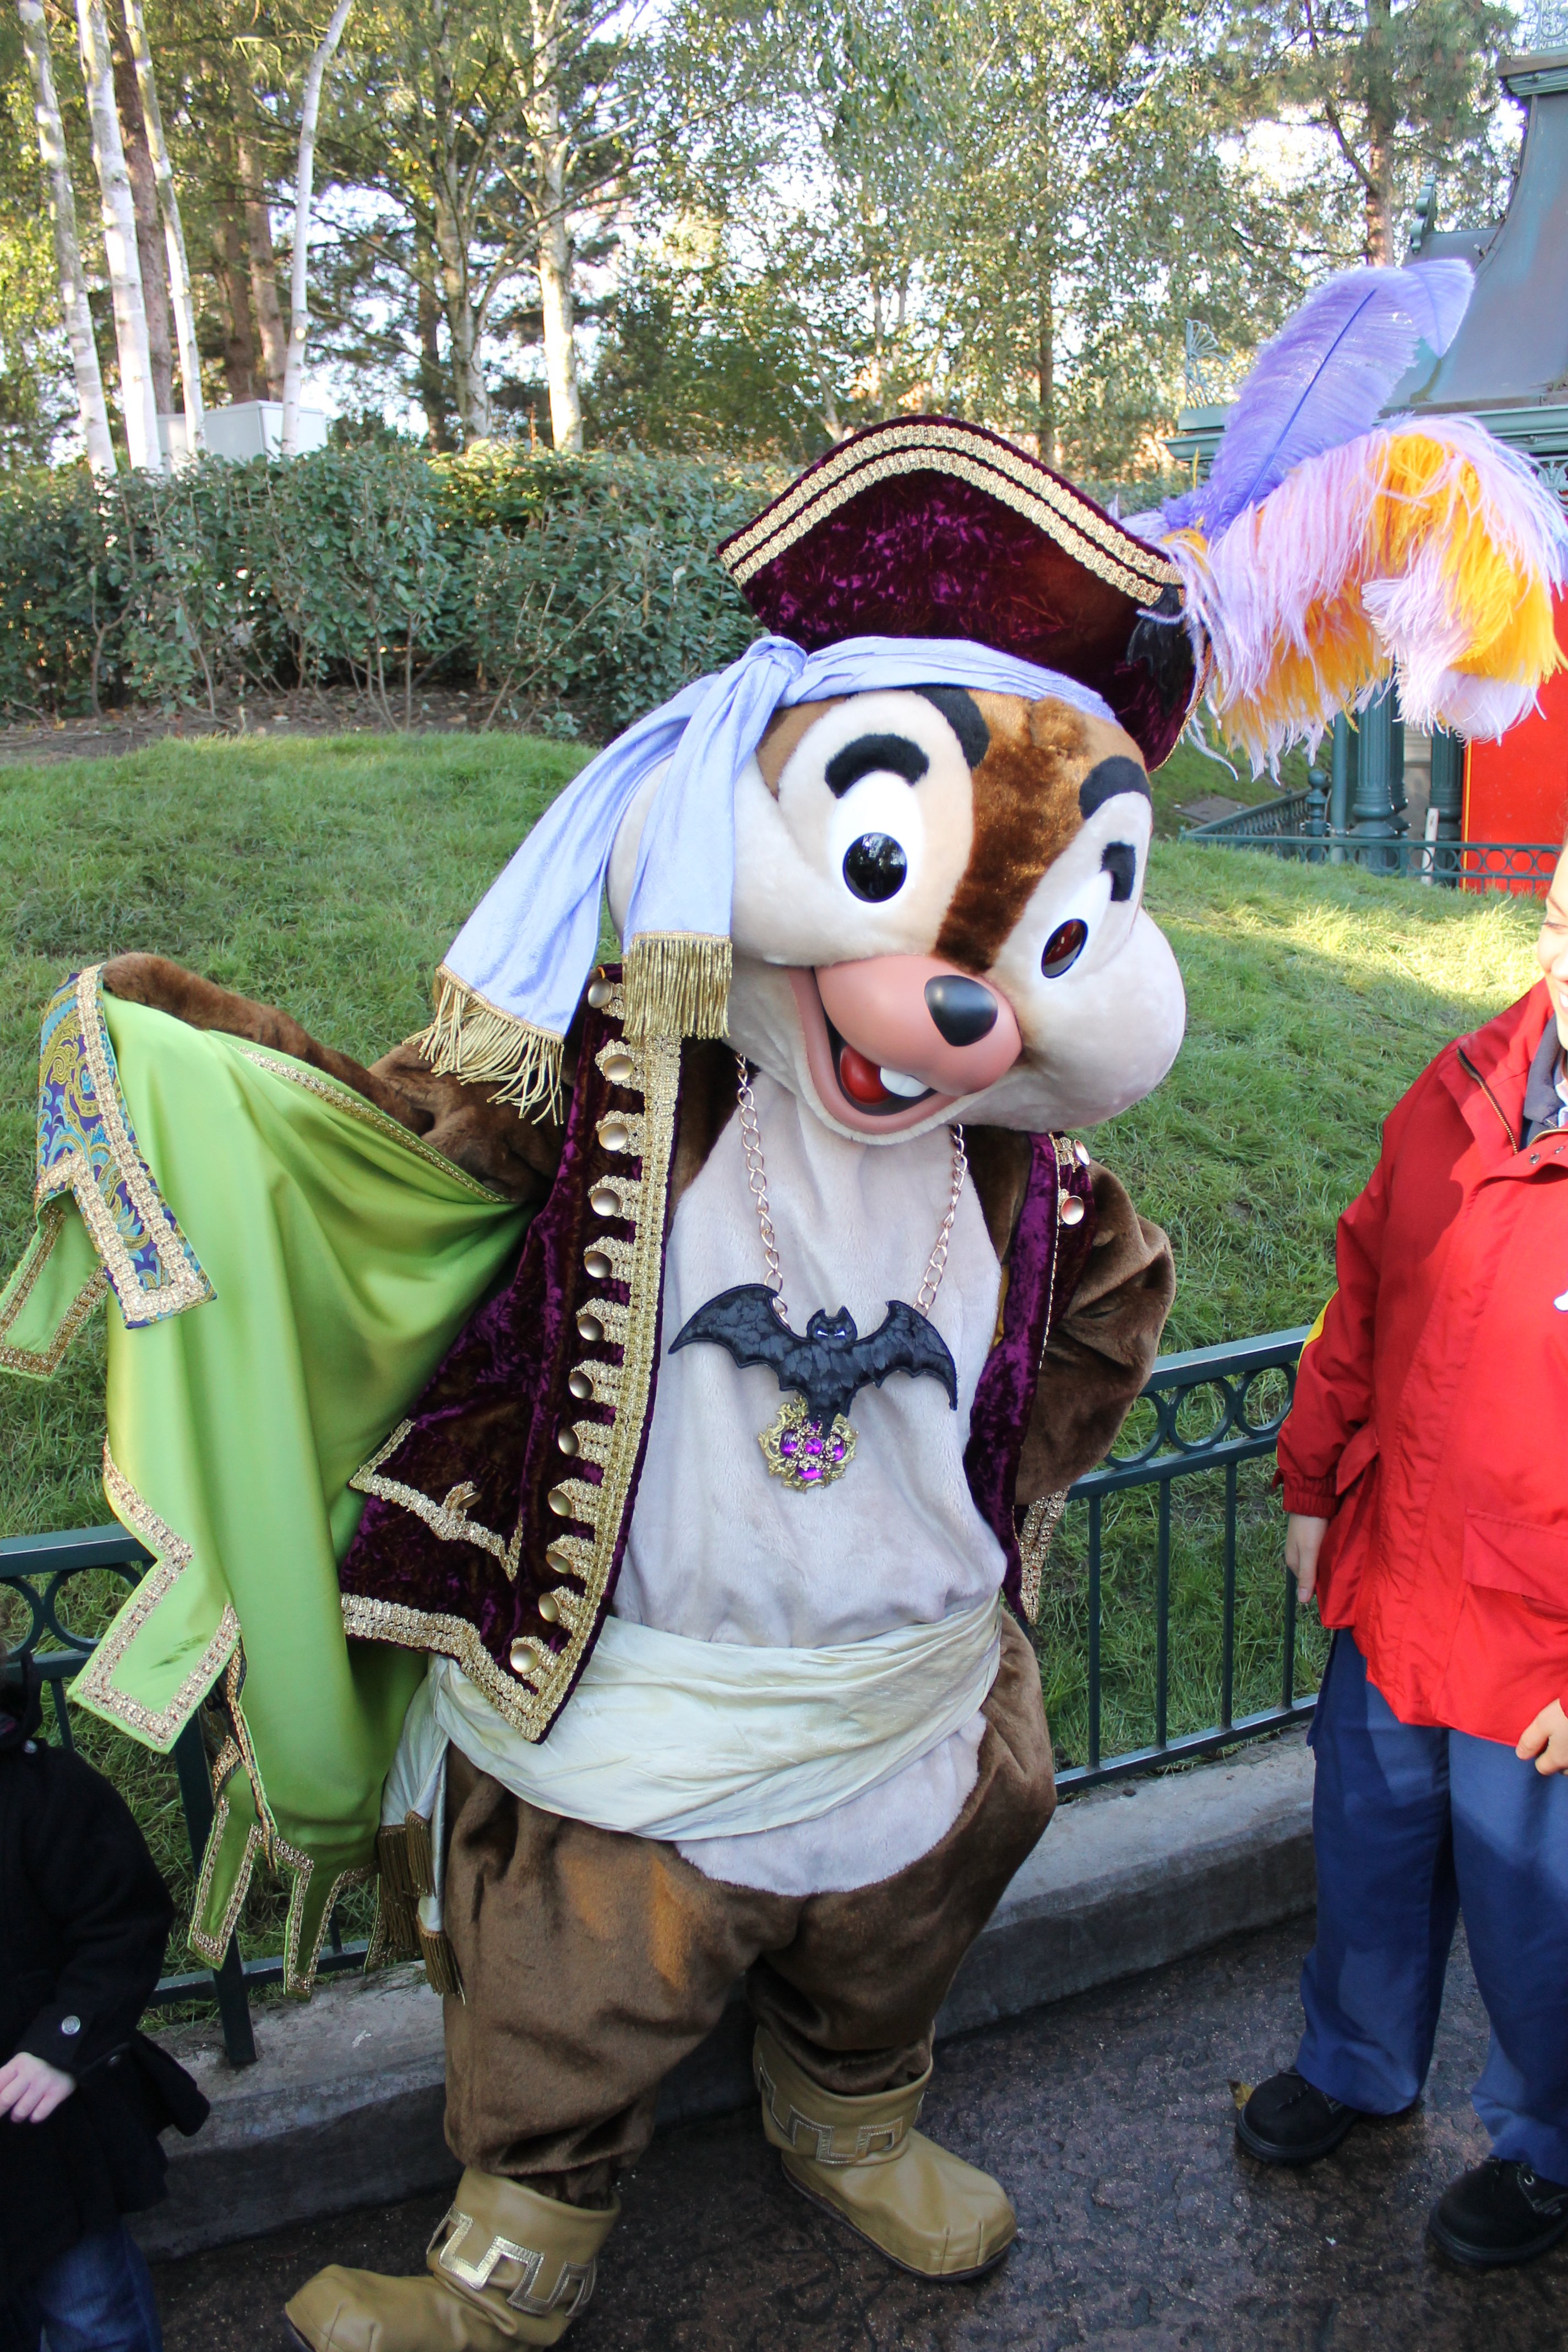 On October 31st 2012 the Disney Character Train was bringing out some of the VIP Characters in special Halloween Pirate outfits. These outfits were only used during that day.